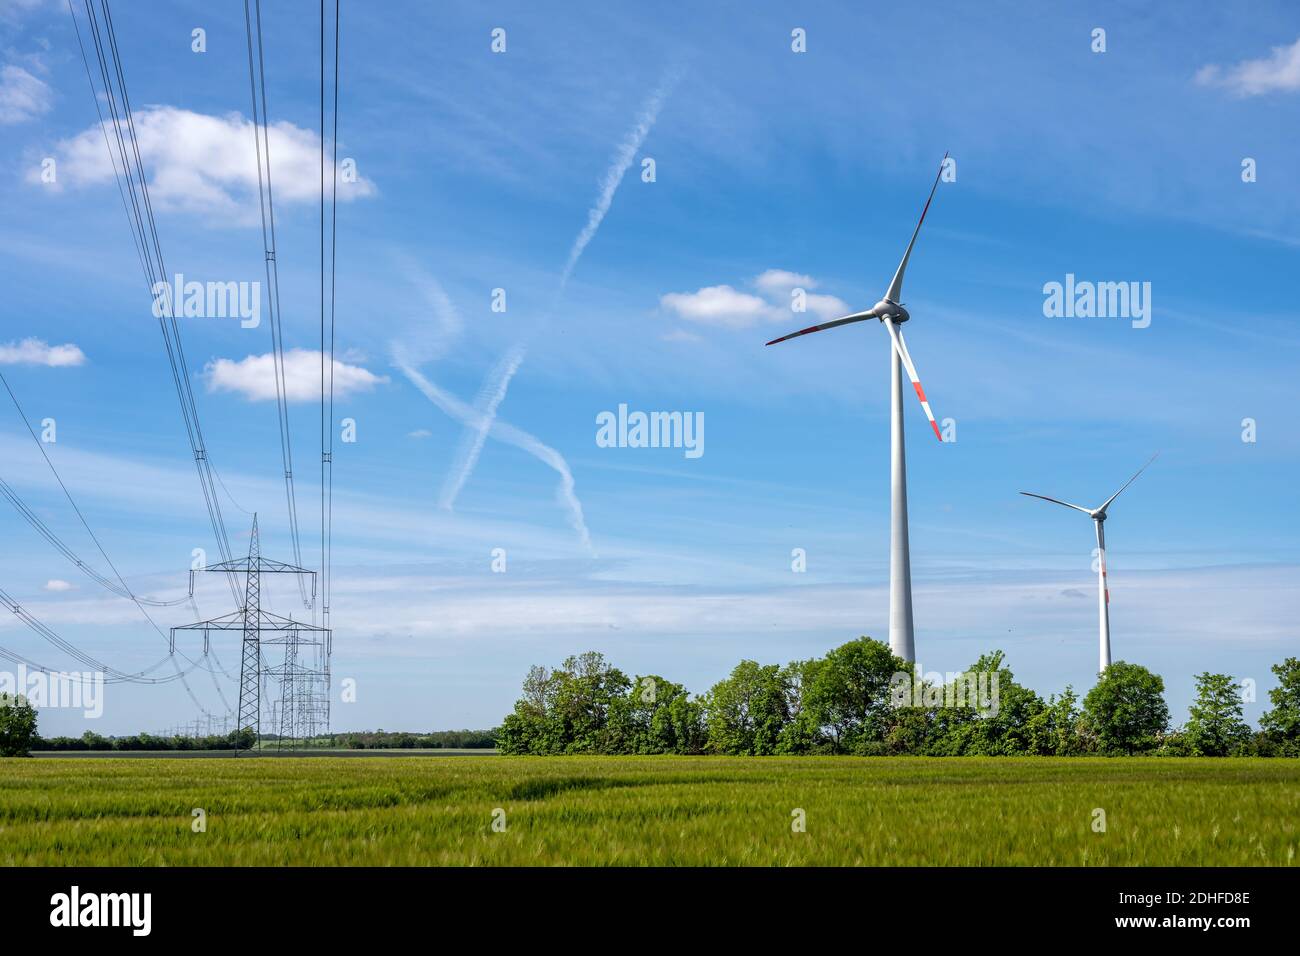 Wind wheels and power lines seen in Germany Stock Photo